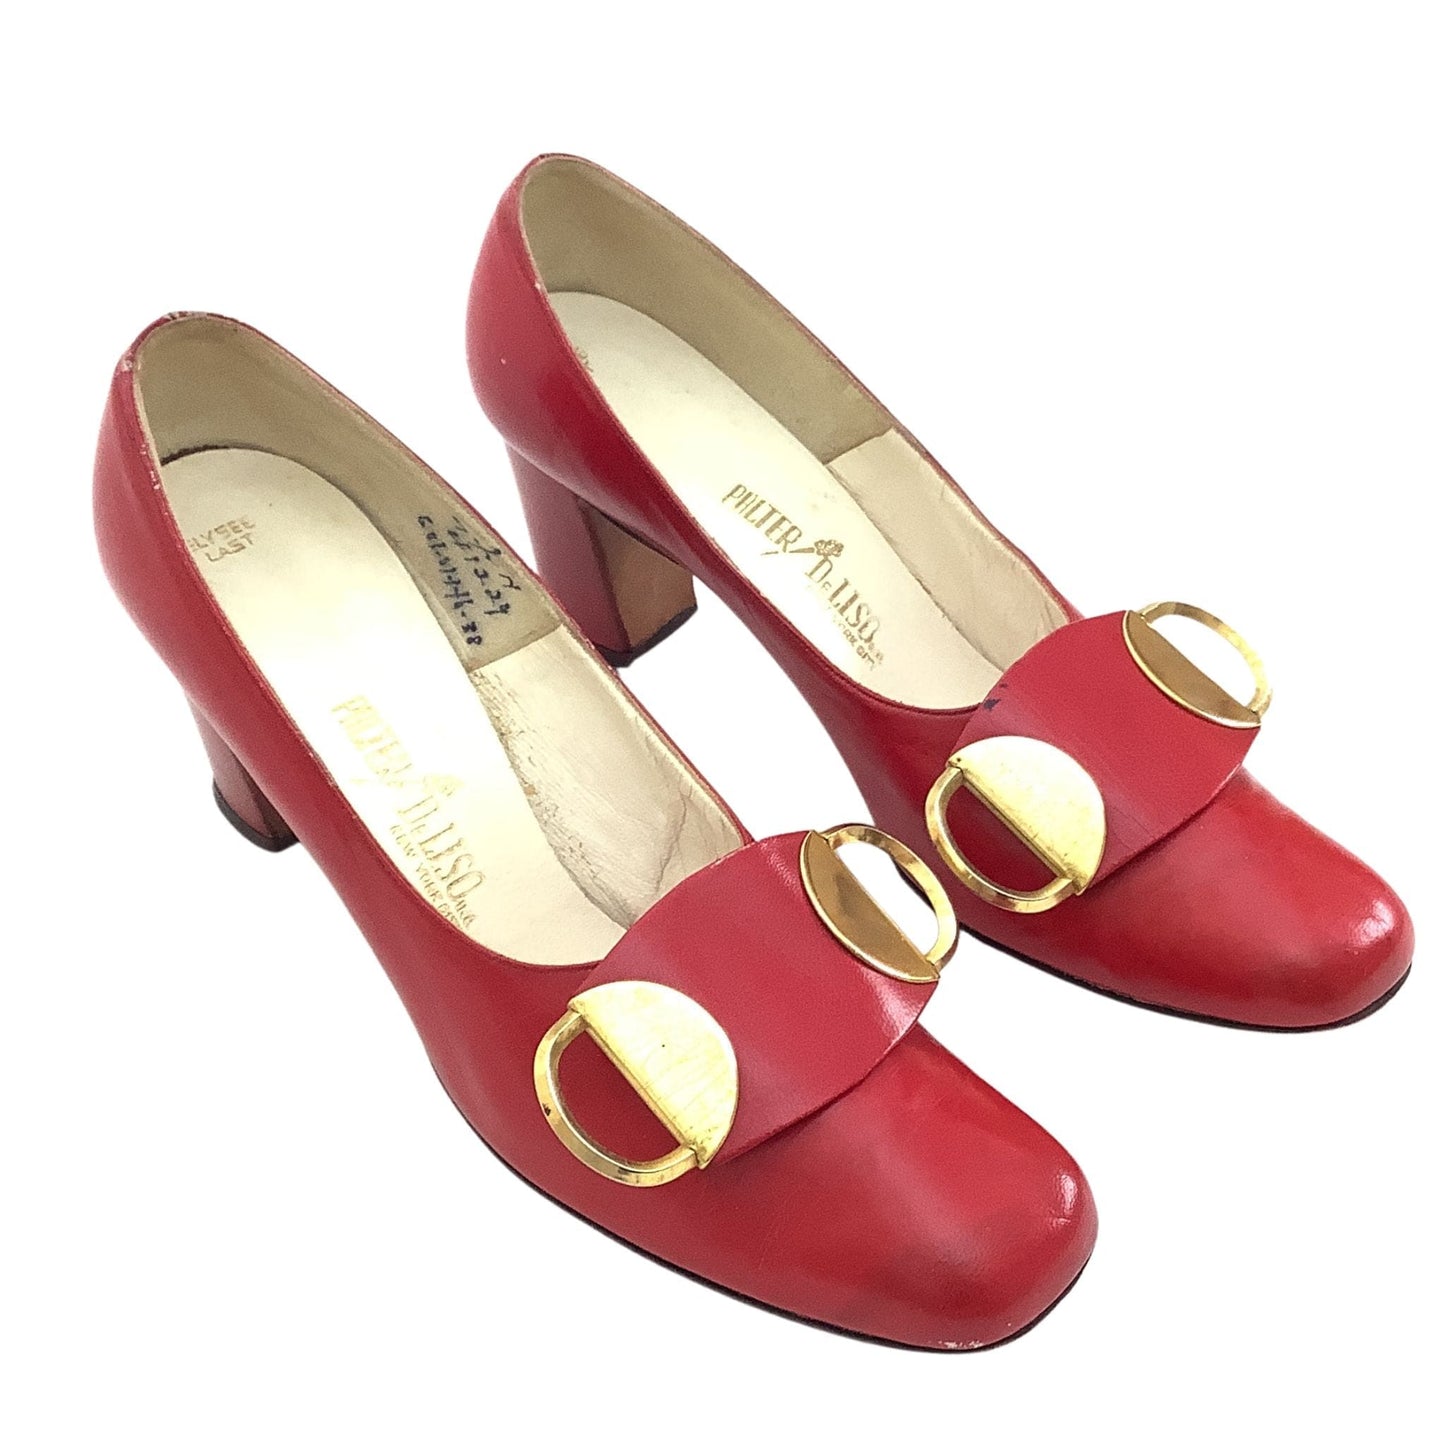 Palter Deliso Red Pumps 7 / Red / Classic